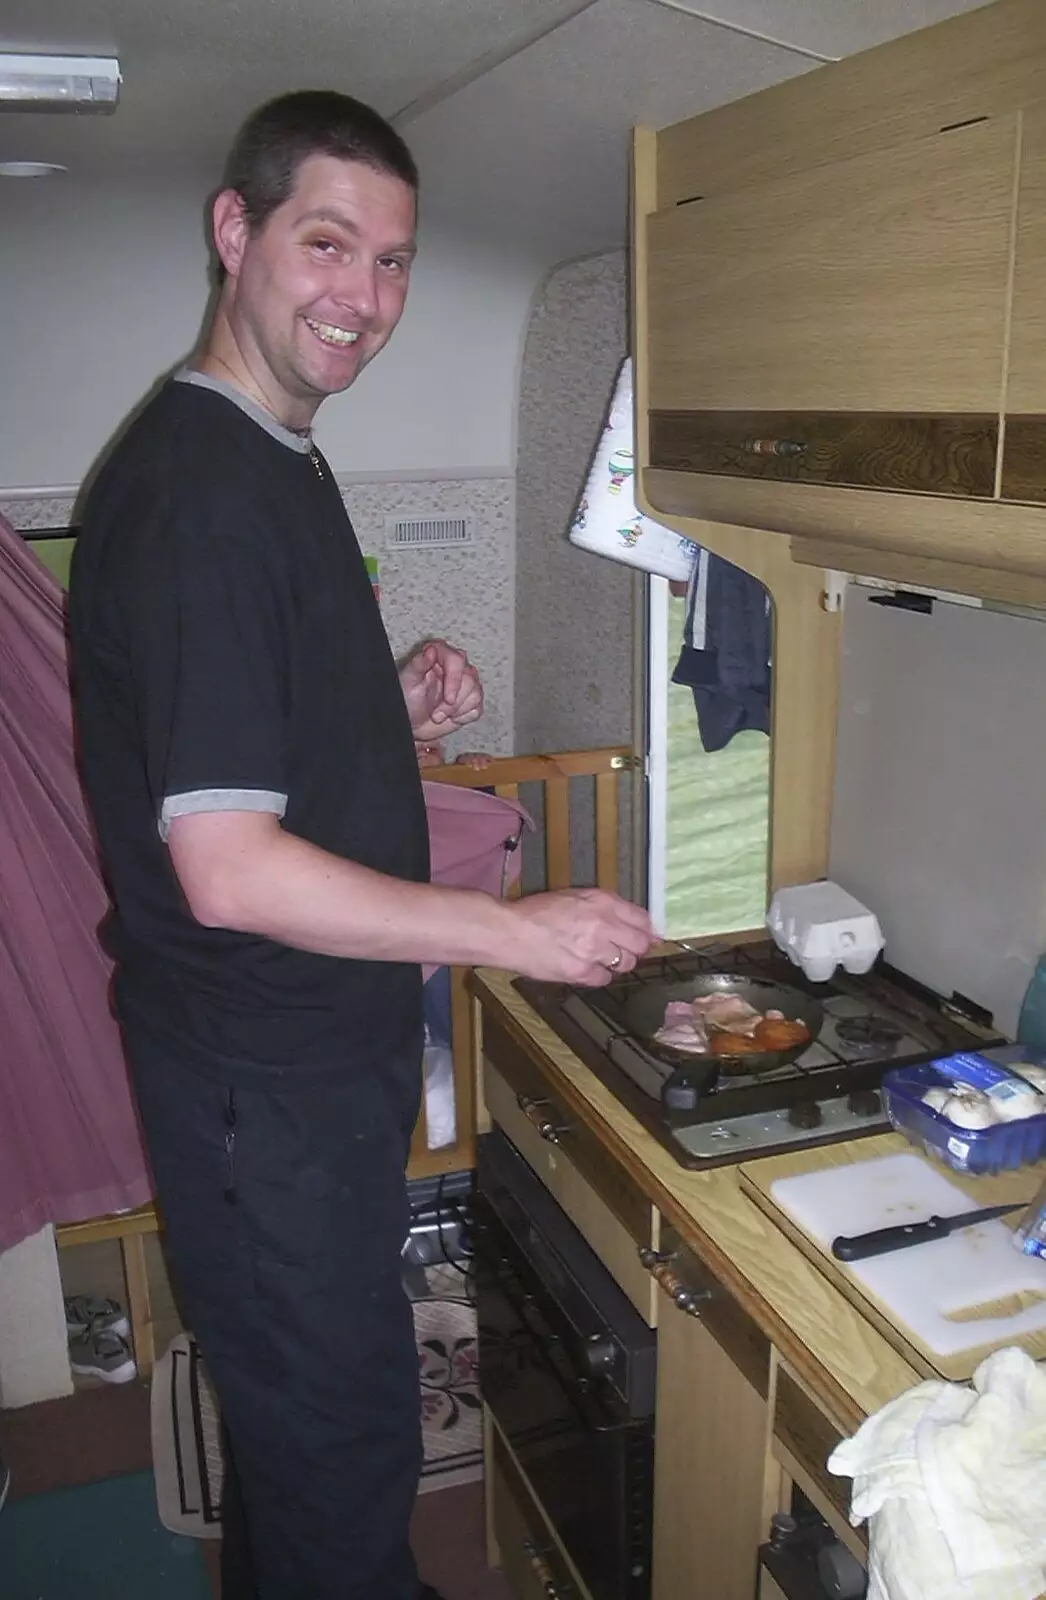 Sean is also frying up, from Corfe Castle Camping, Corfe, Dorset - 30th May 2004